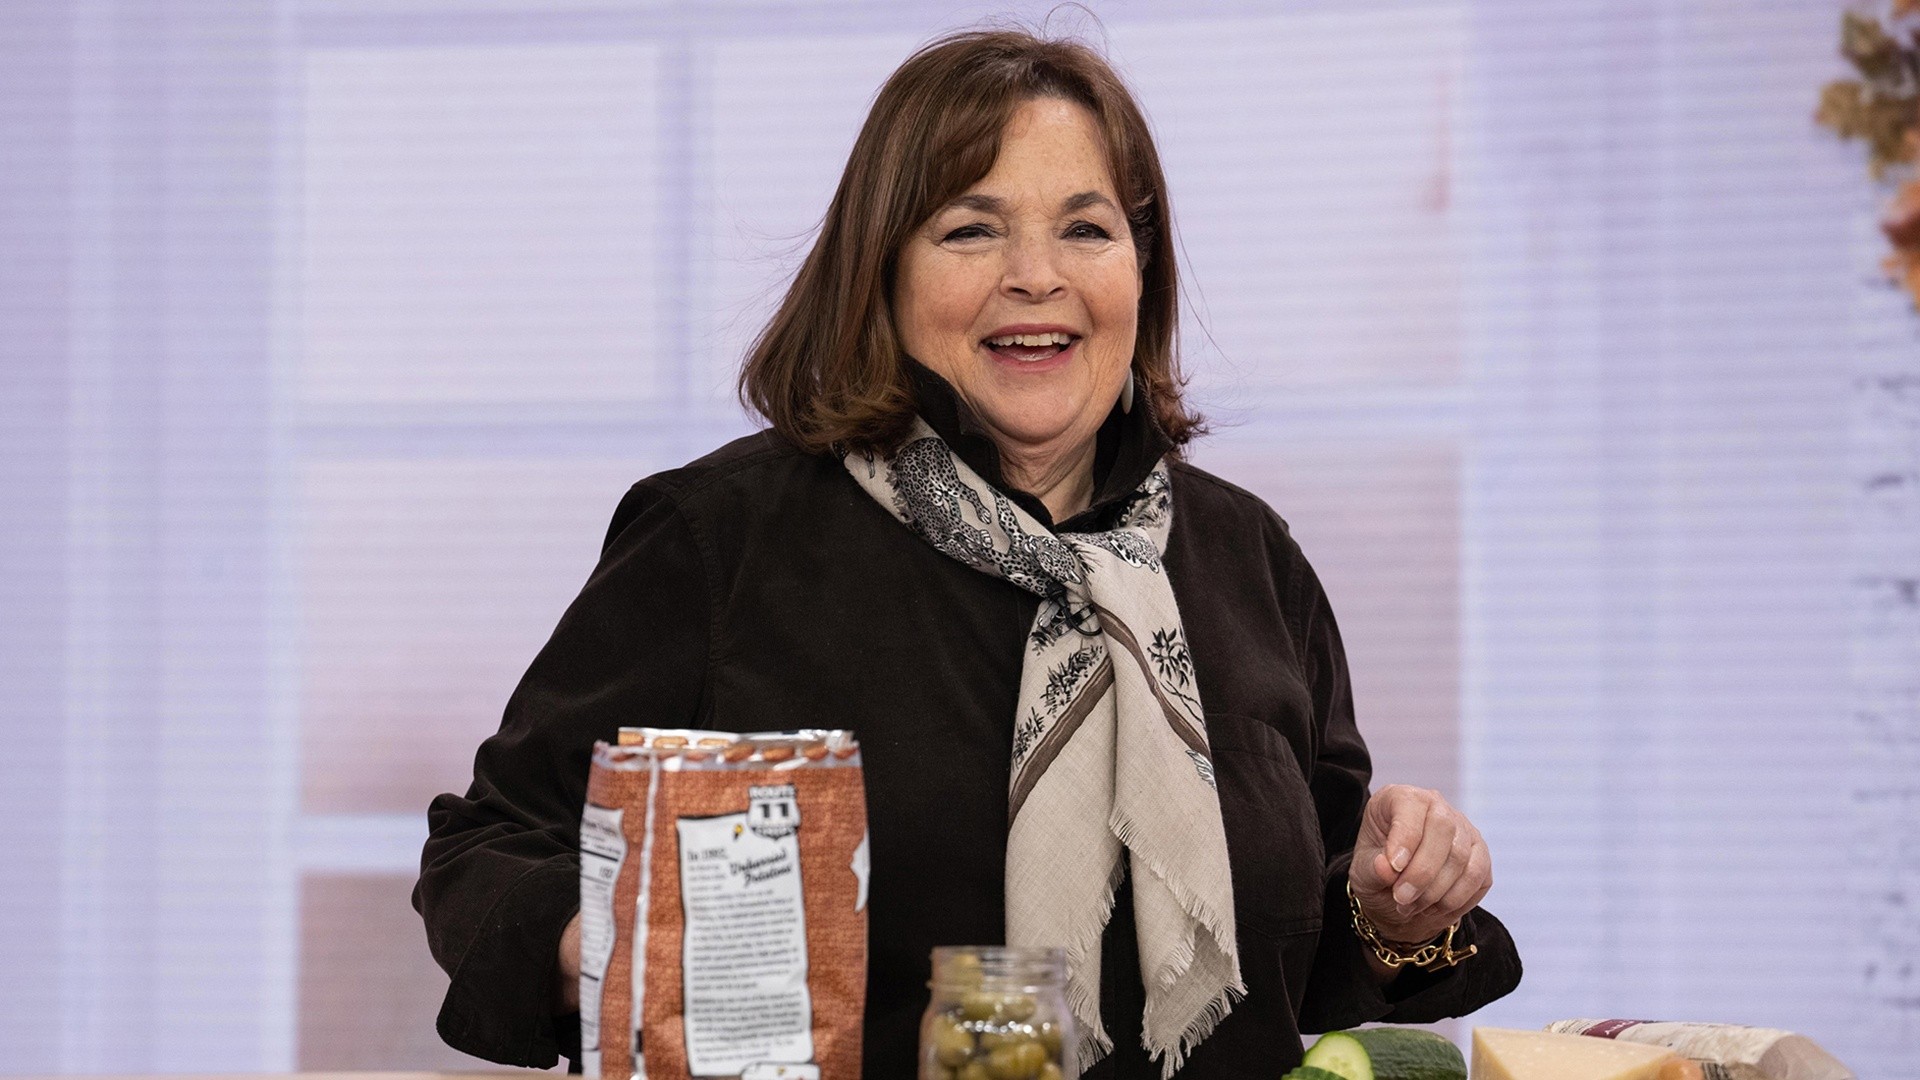 Ina Garten has a new project in the works: A memoir!